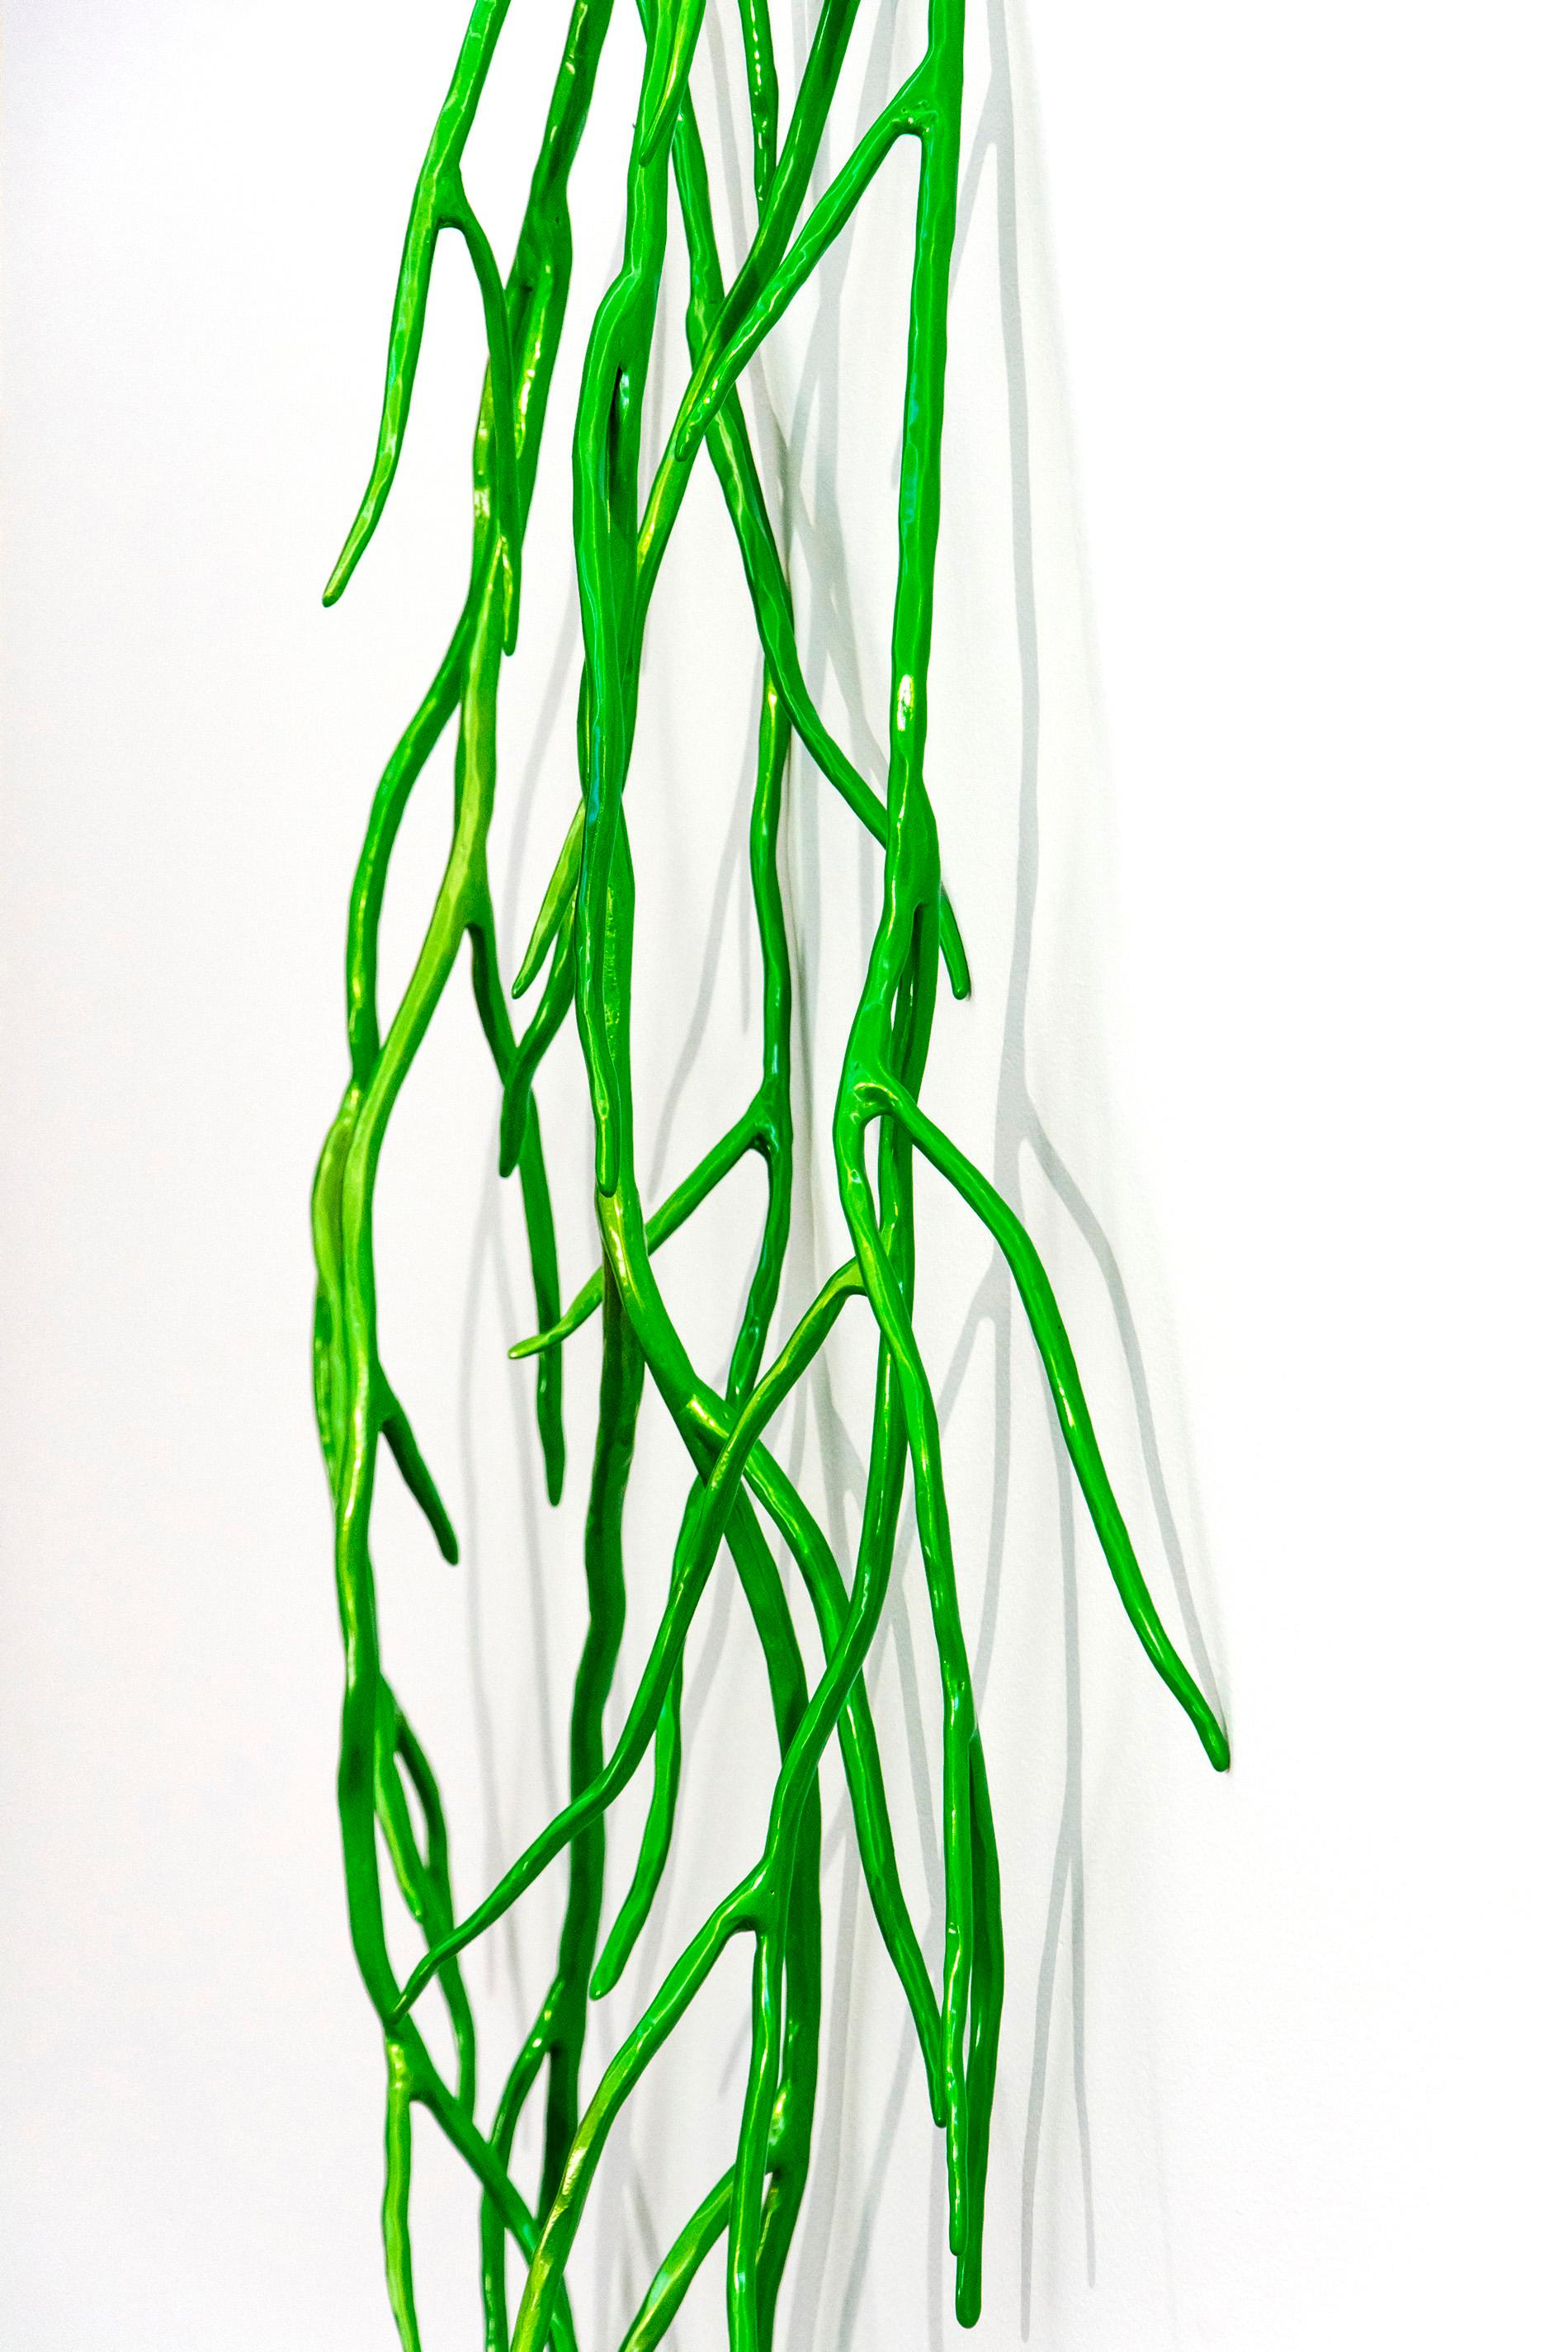 Bough Laden With Candy Apple Green - bright, abstract, steel wall sculpture - Sculpture by Shayne Dark